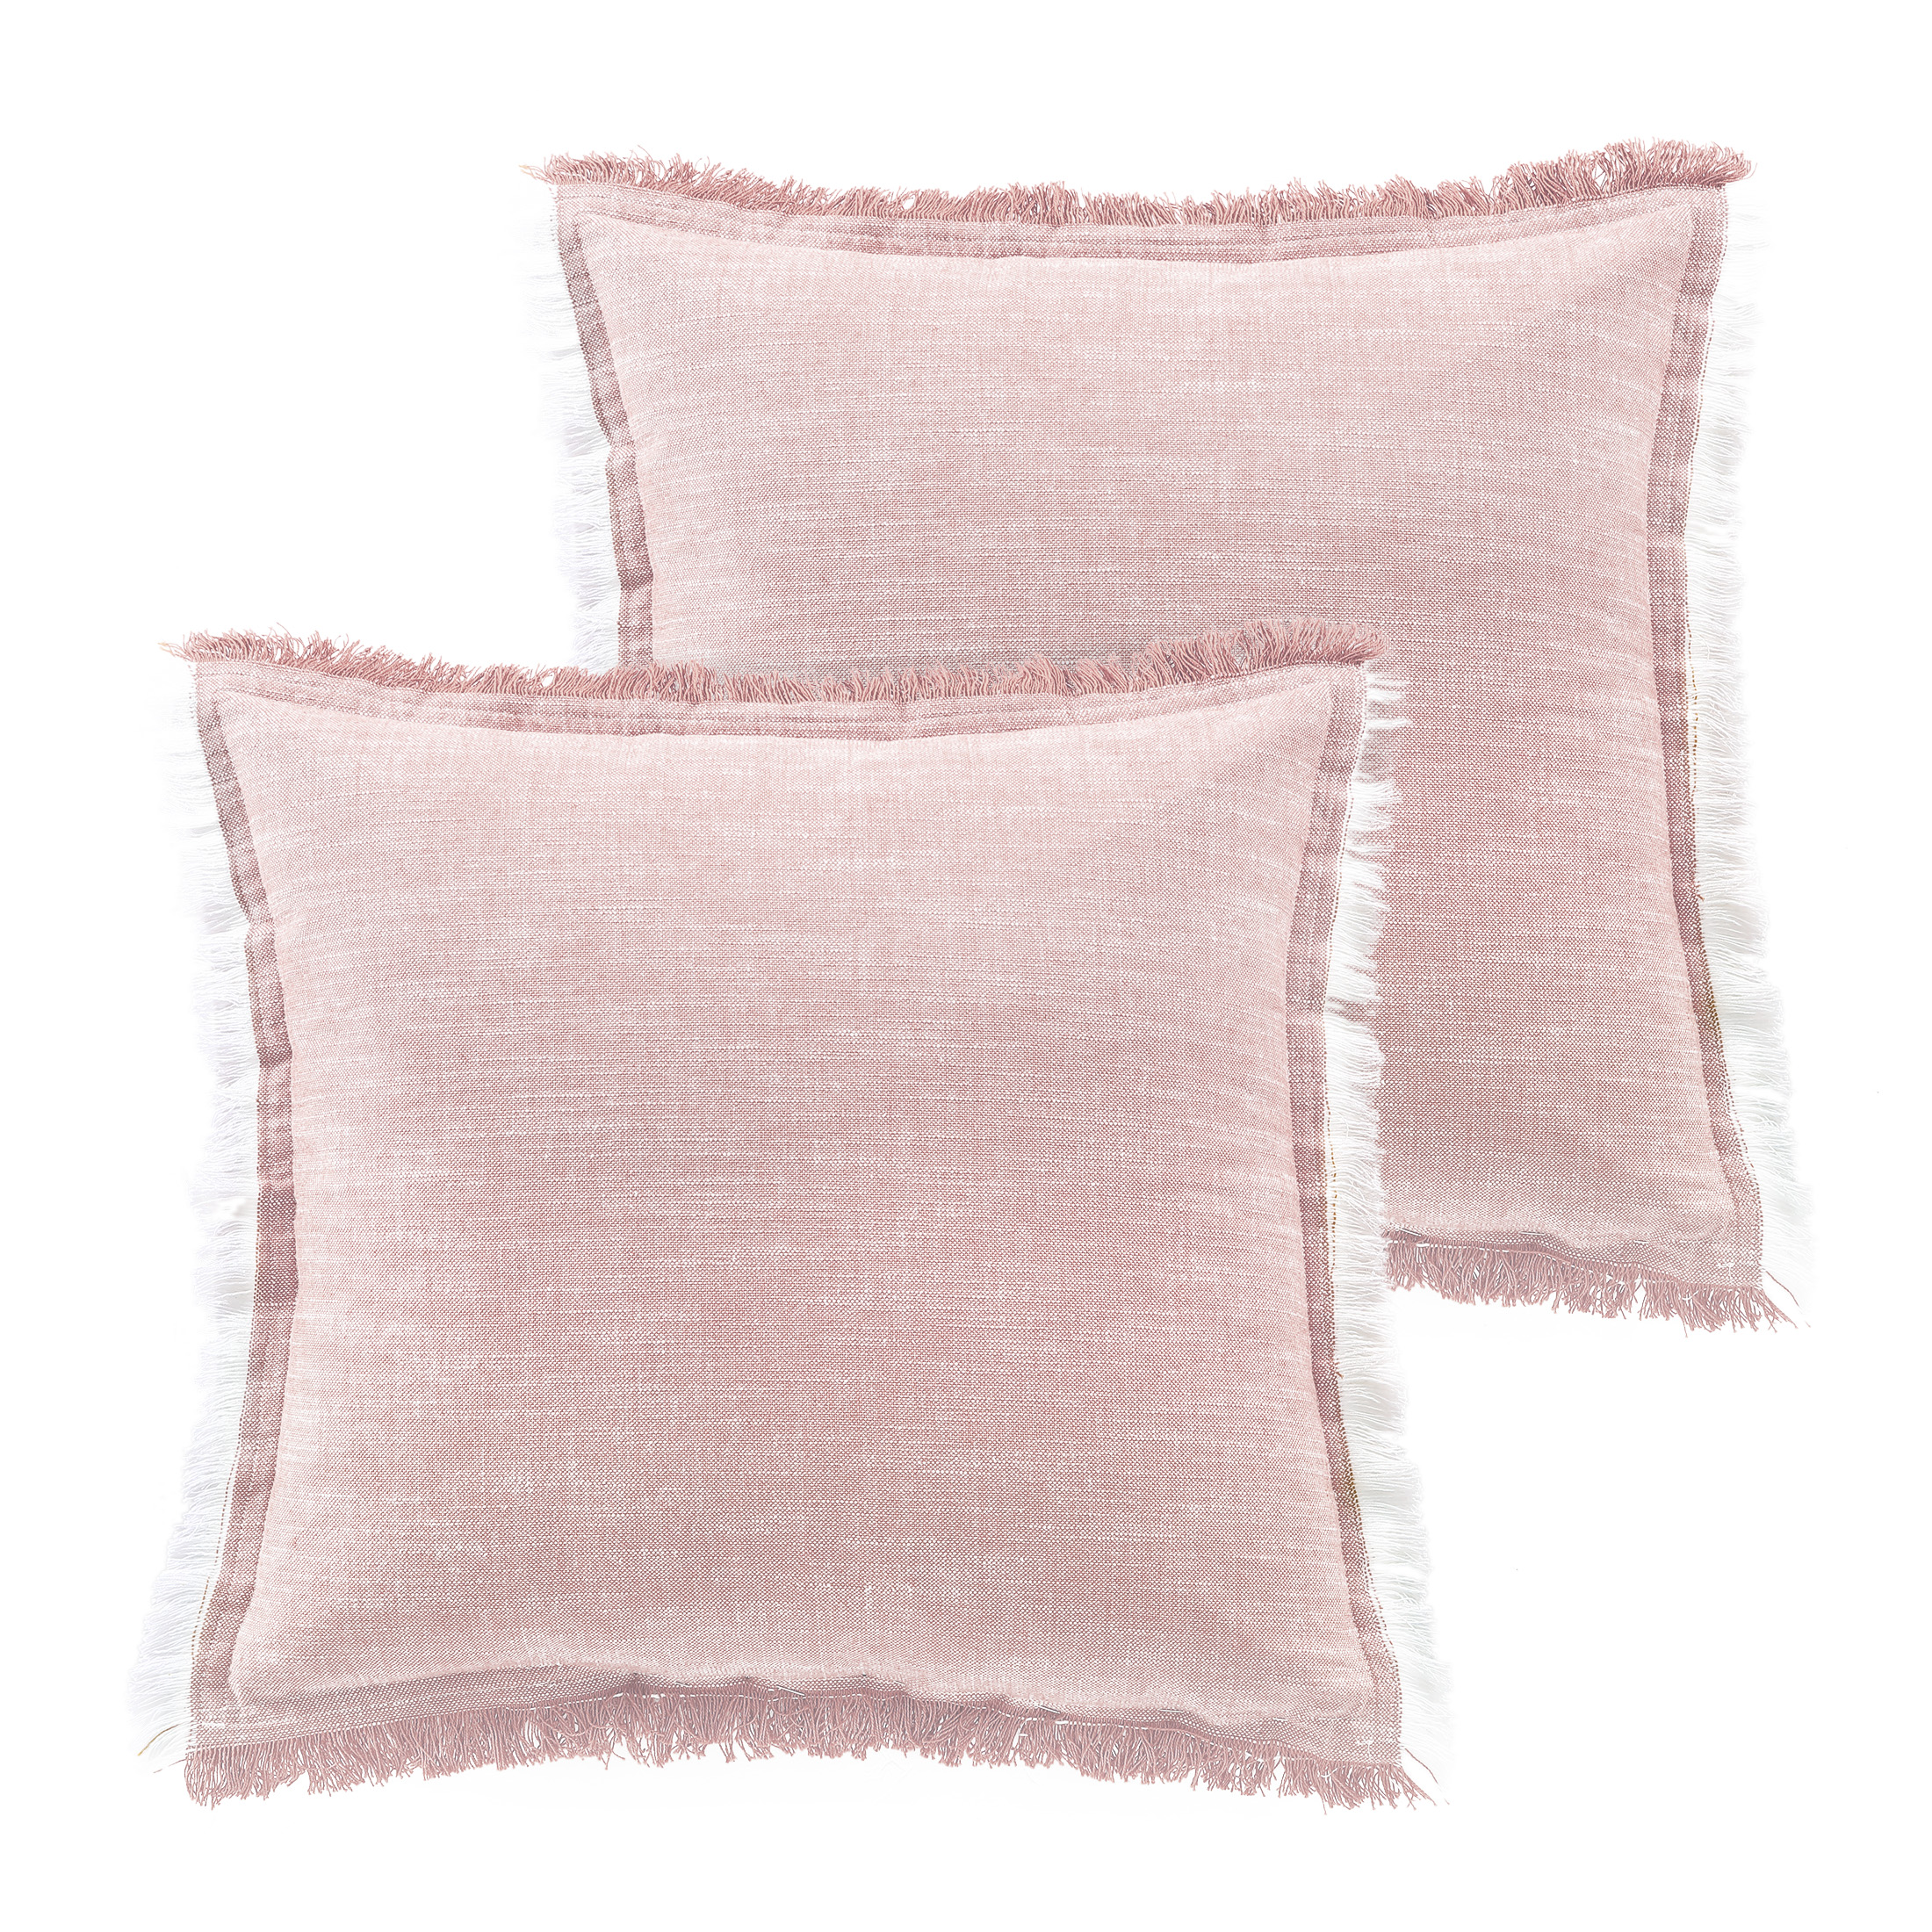 Better Homes & Gardens, Blush Throw Pillows, Square, 20" x 20", Rose Blush, 2 Pack - image 1 of 5